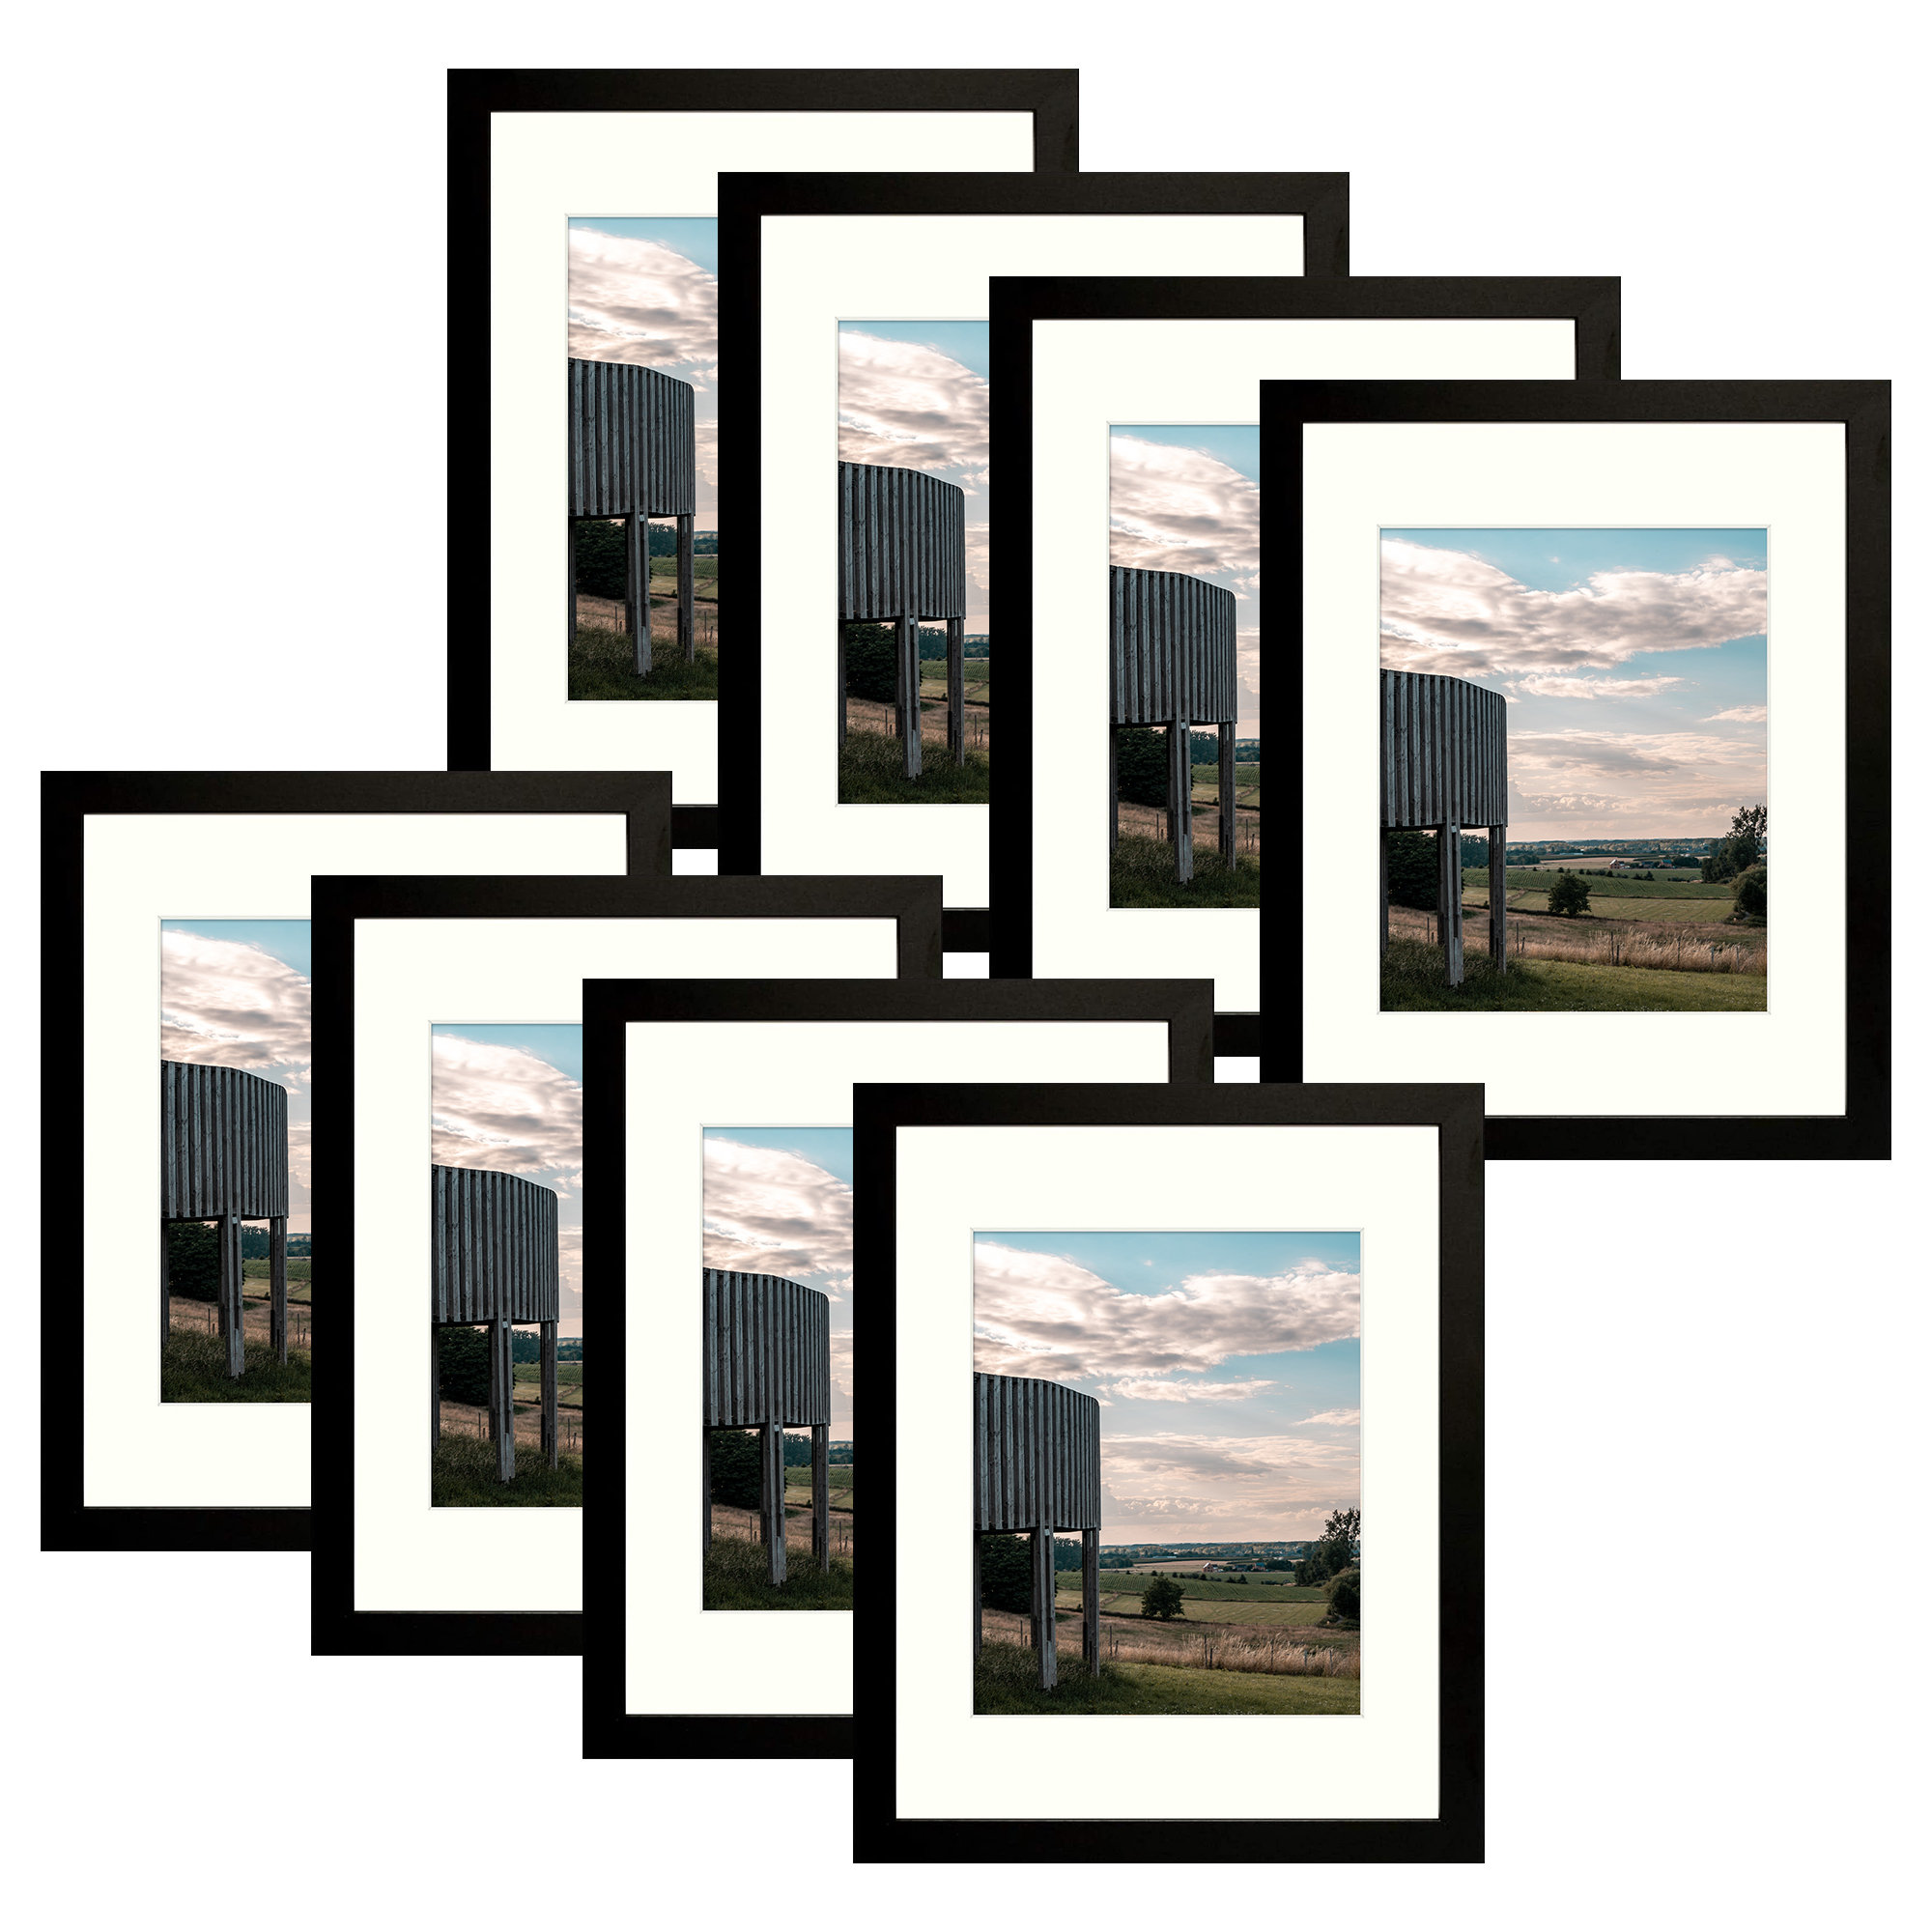 Black Gallery Wall Picture Frame 11x14 Matted for 8x10 Pictures Photos, Artworks, Prints (Set of 6) Latitude Run